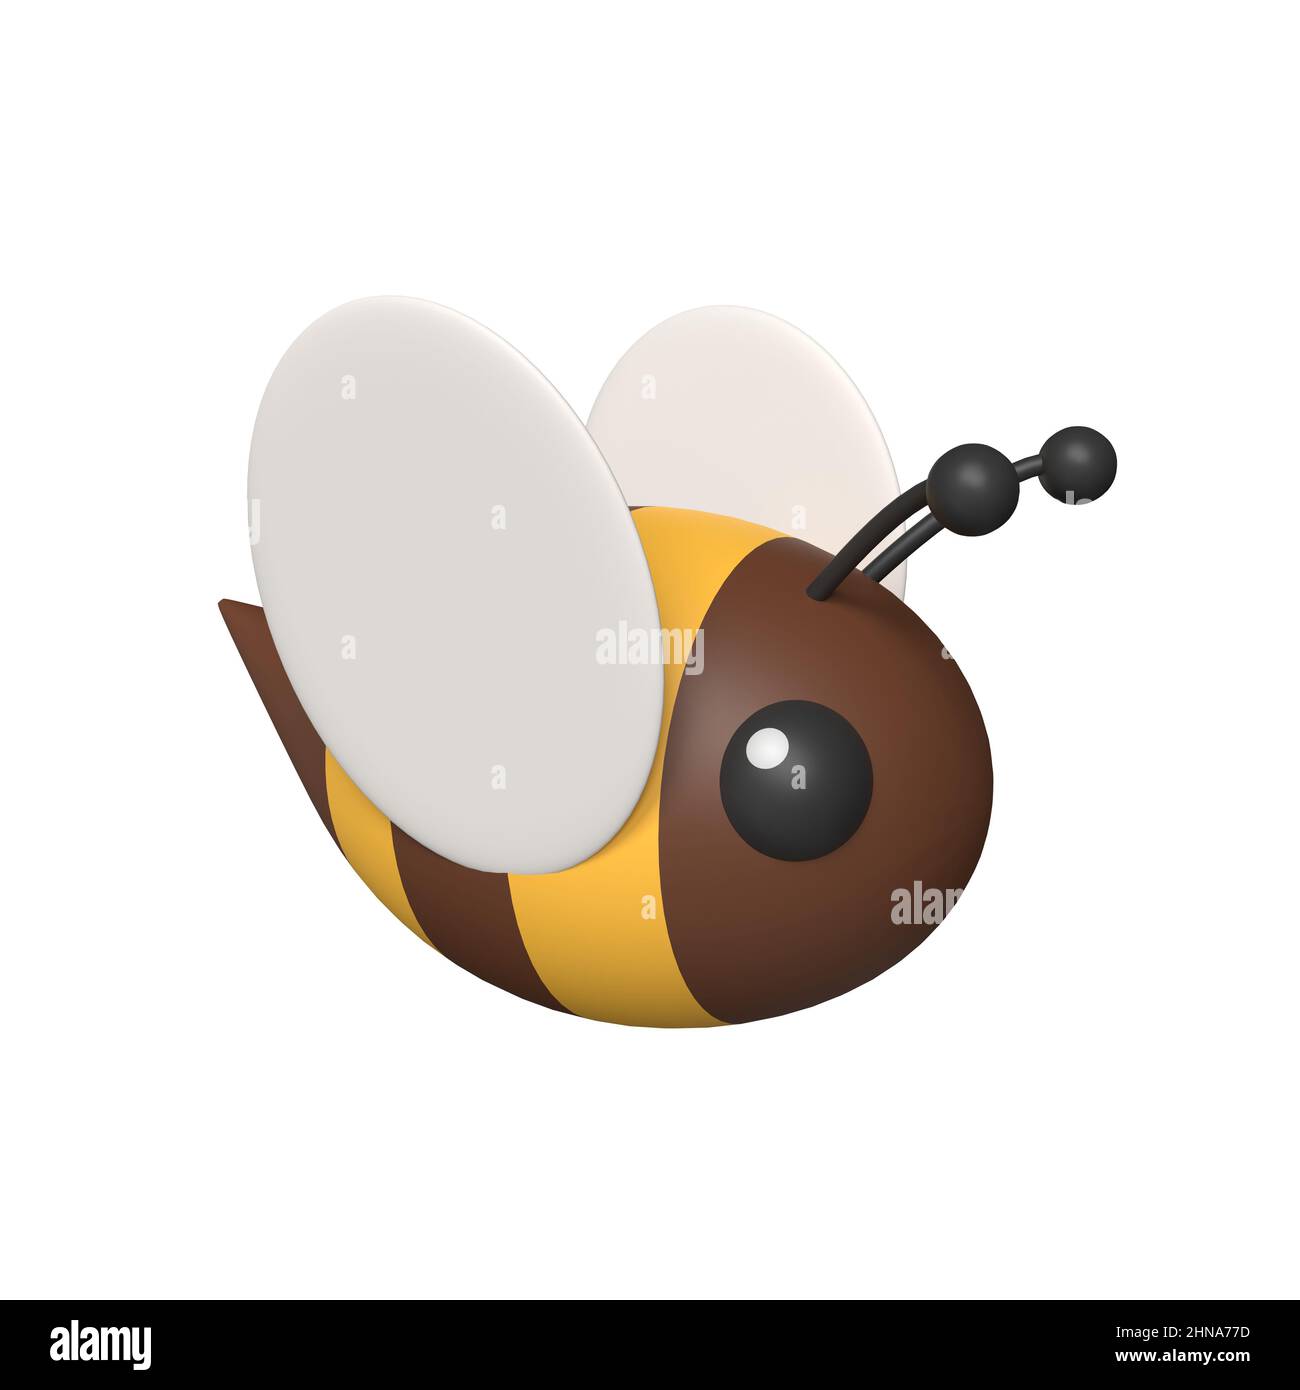 Cute cartoon bee isolated on white background. 3D image. Stock Photo